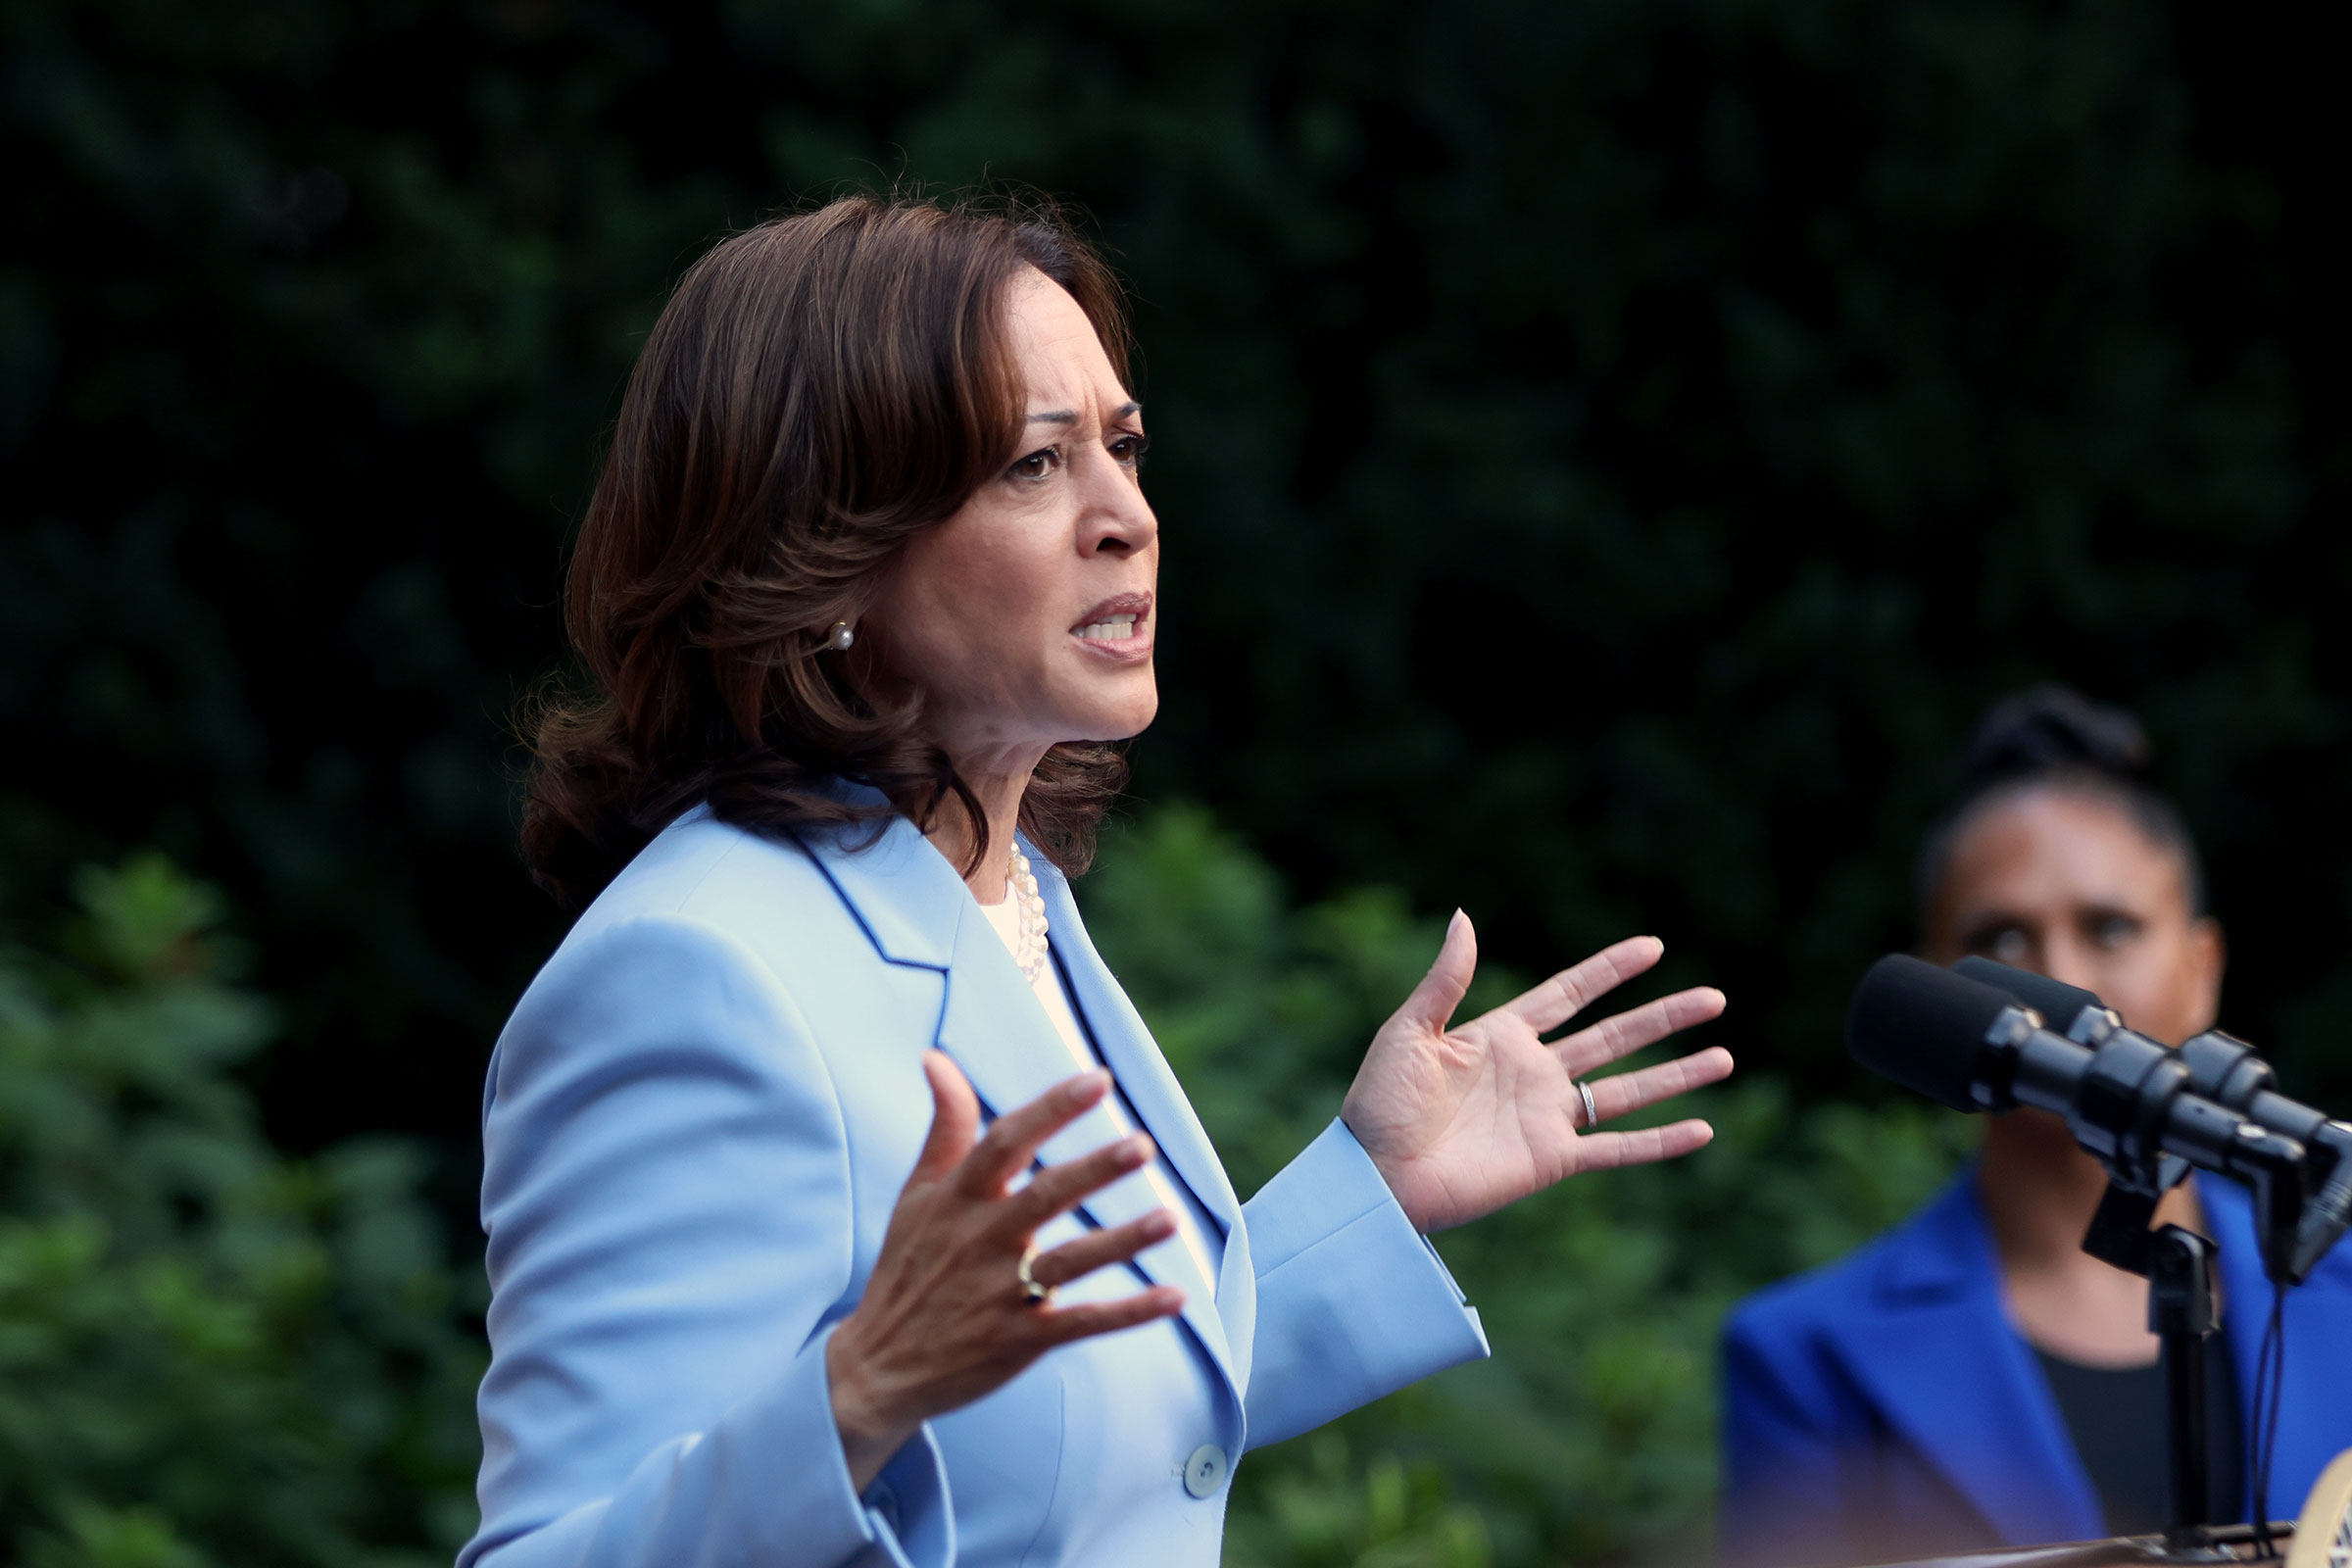 Vice President of the United States Kamala Harris speaks onstage during a Pride Celebration in collaboration with GLAAD on June 28, in Washington, DC.